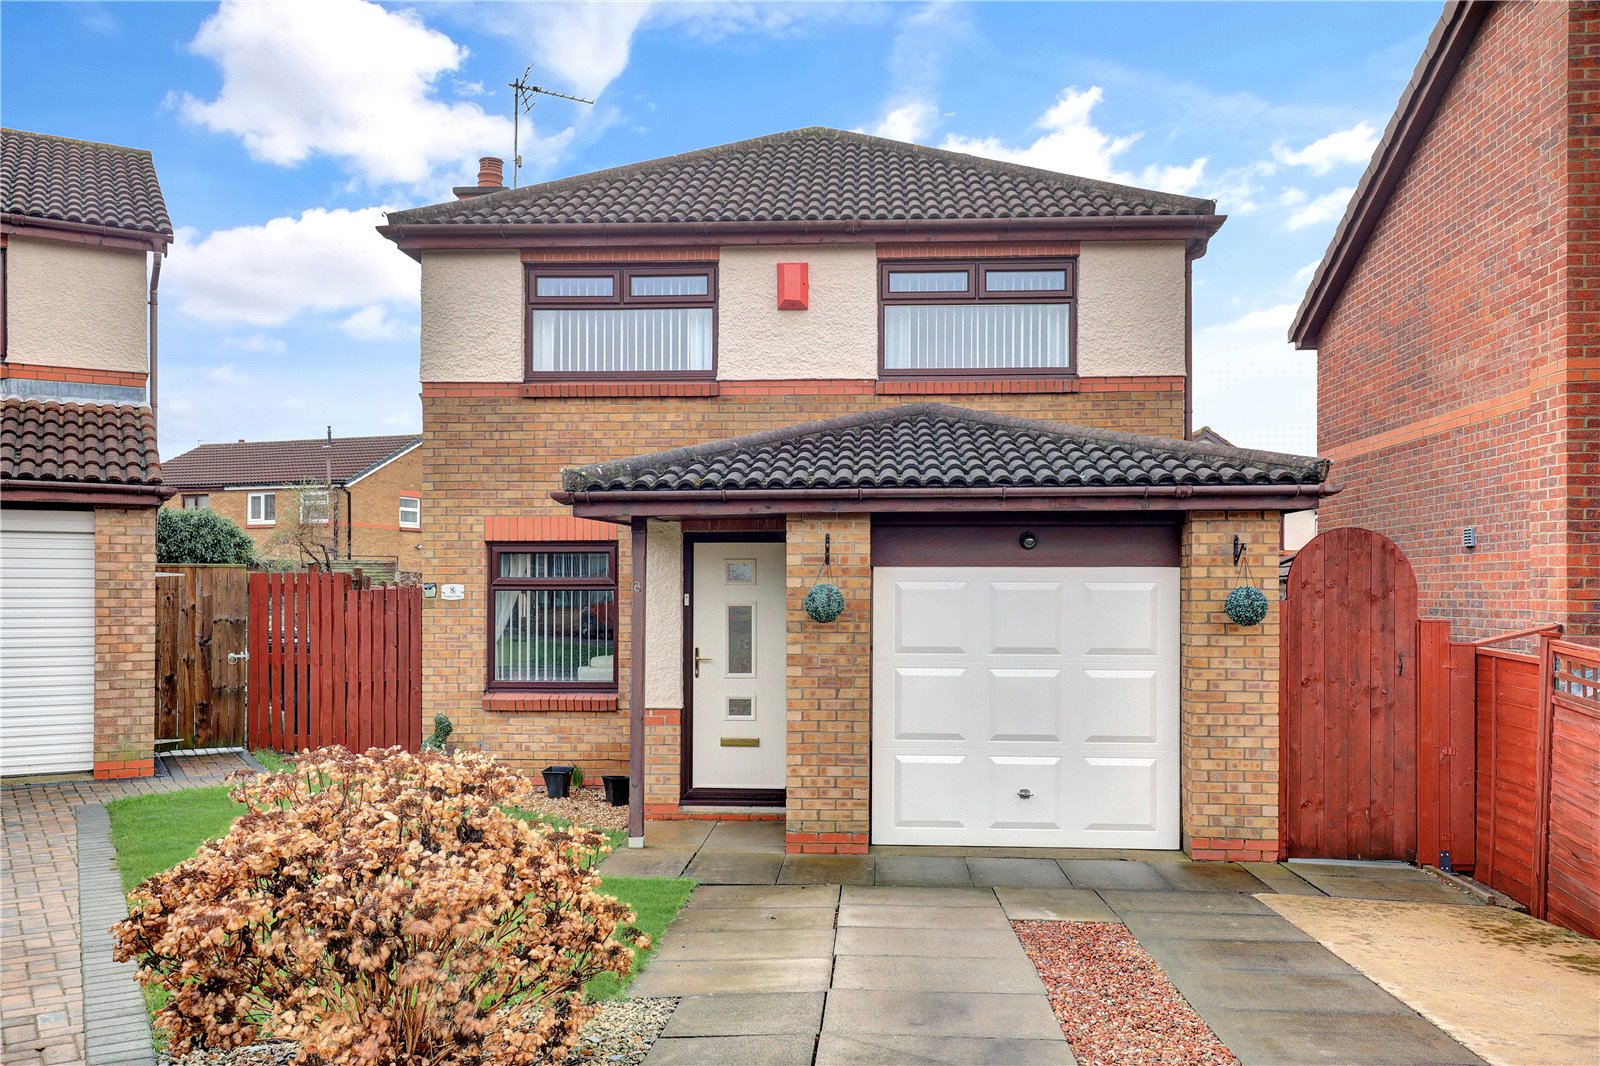 3 bed house for sale in Cooks Court, Ormesby  - Property Image 1